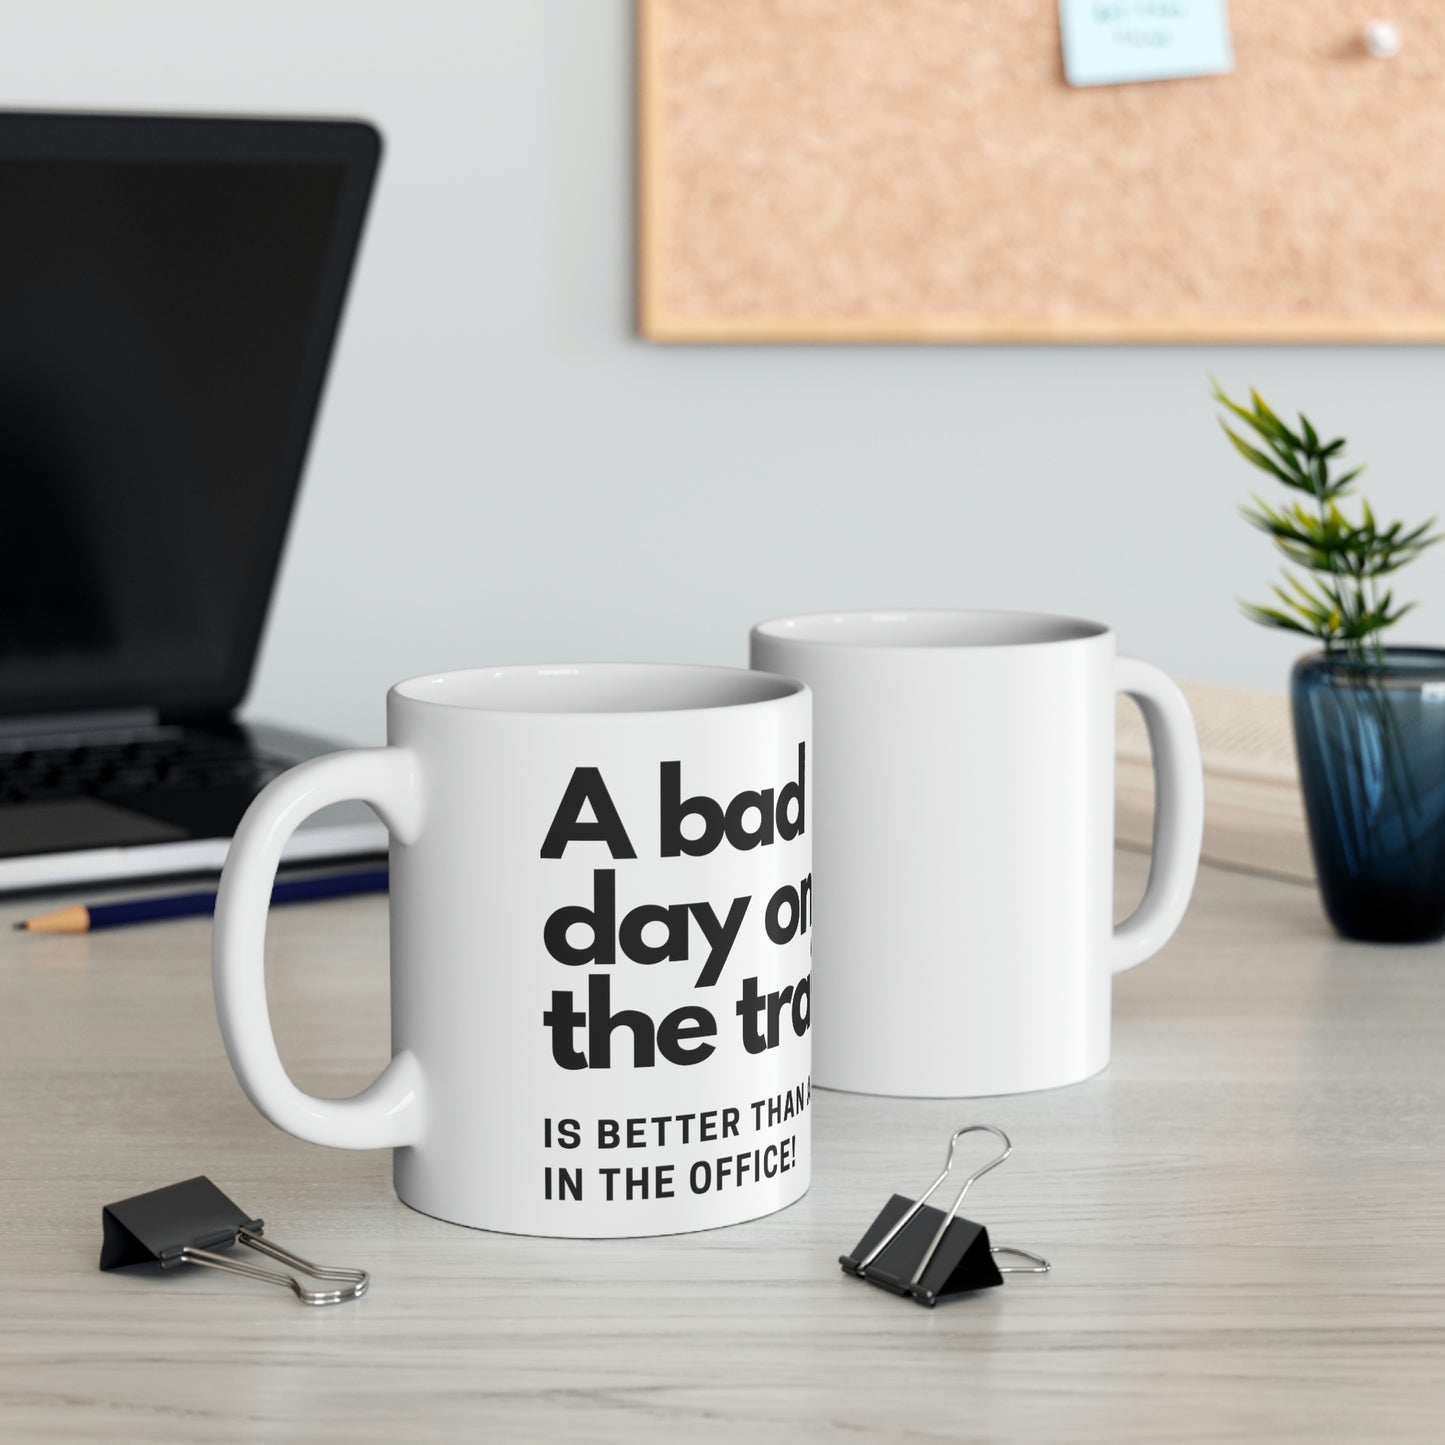 Sarcastic Coffee Mug – A Bad Day on the Trail is better than any day in the office. (White Ceramic)